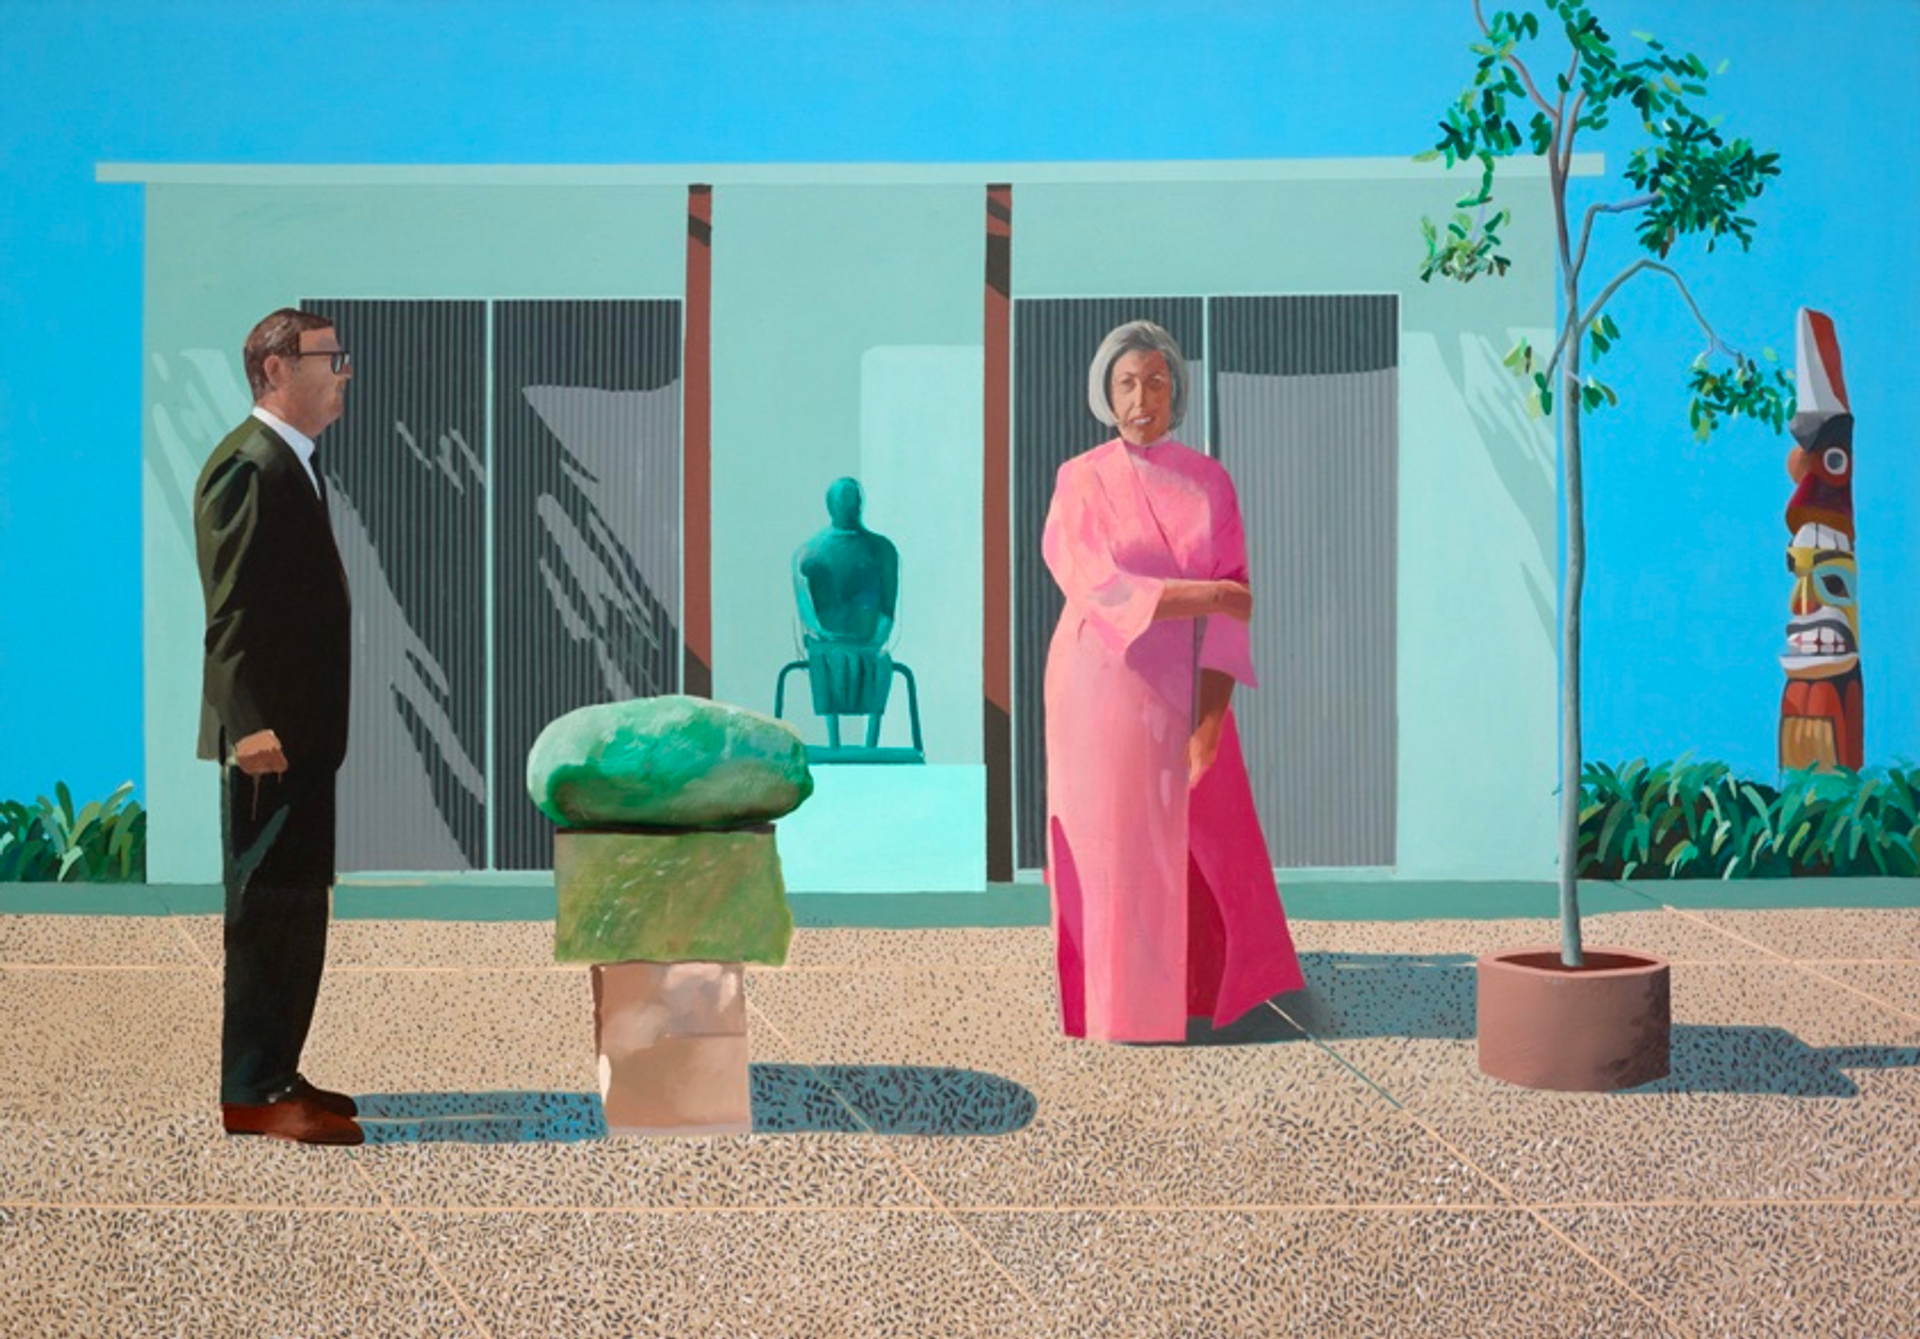 A Guide To David Hockney’s Muses